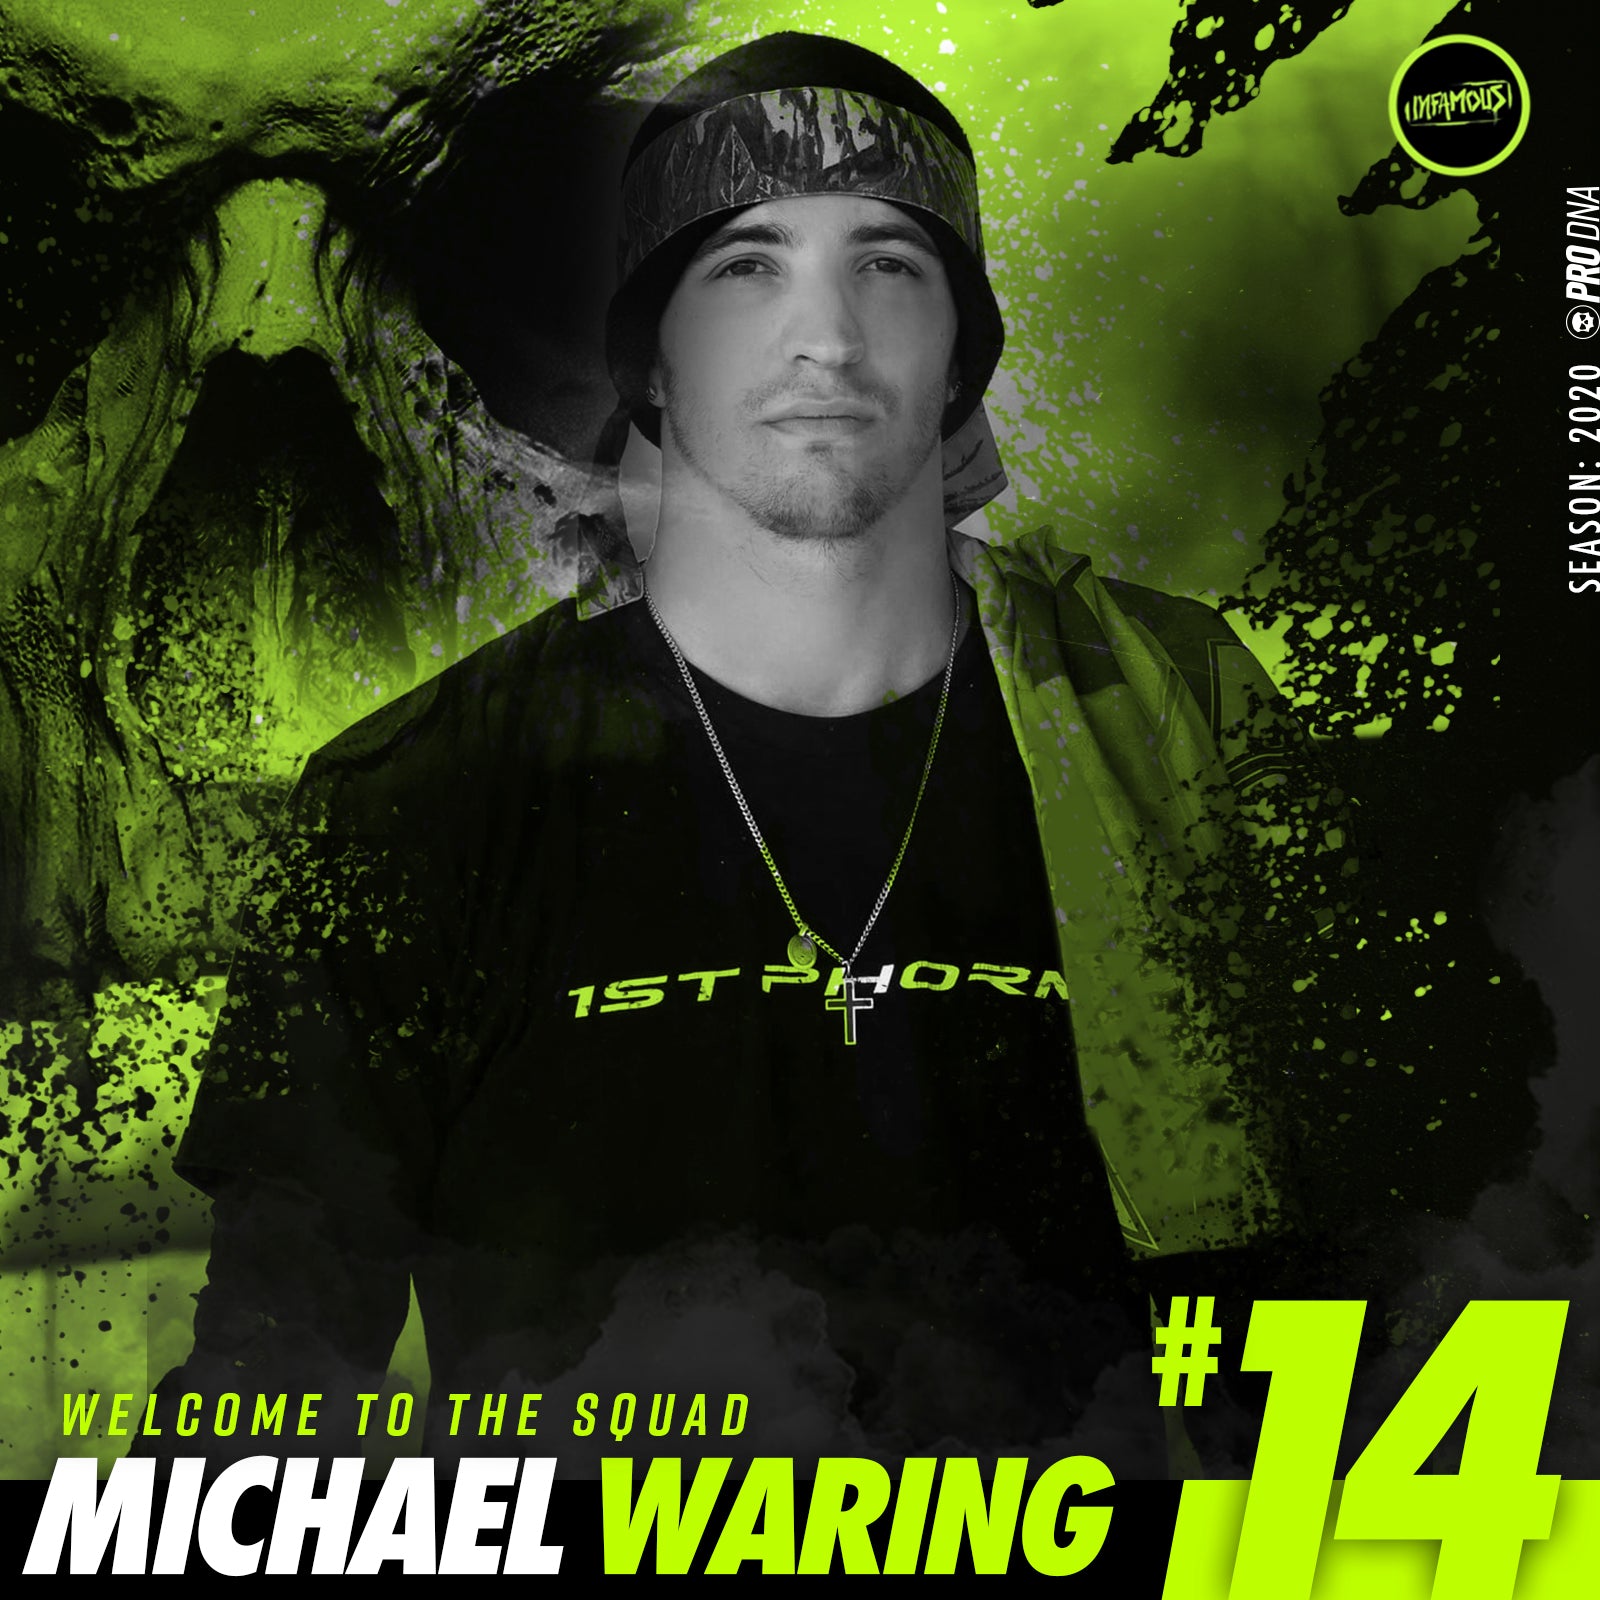 NEW PICKUP - Michael Waring to Infamous